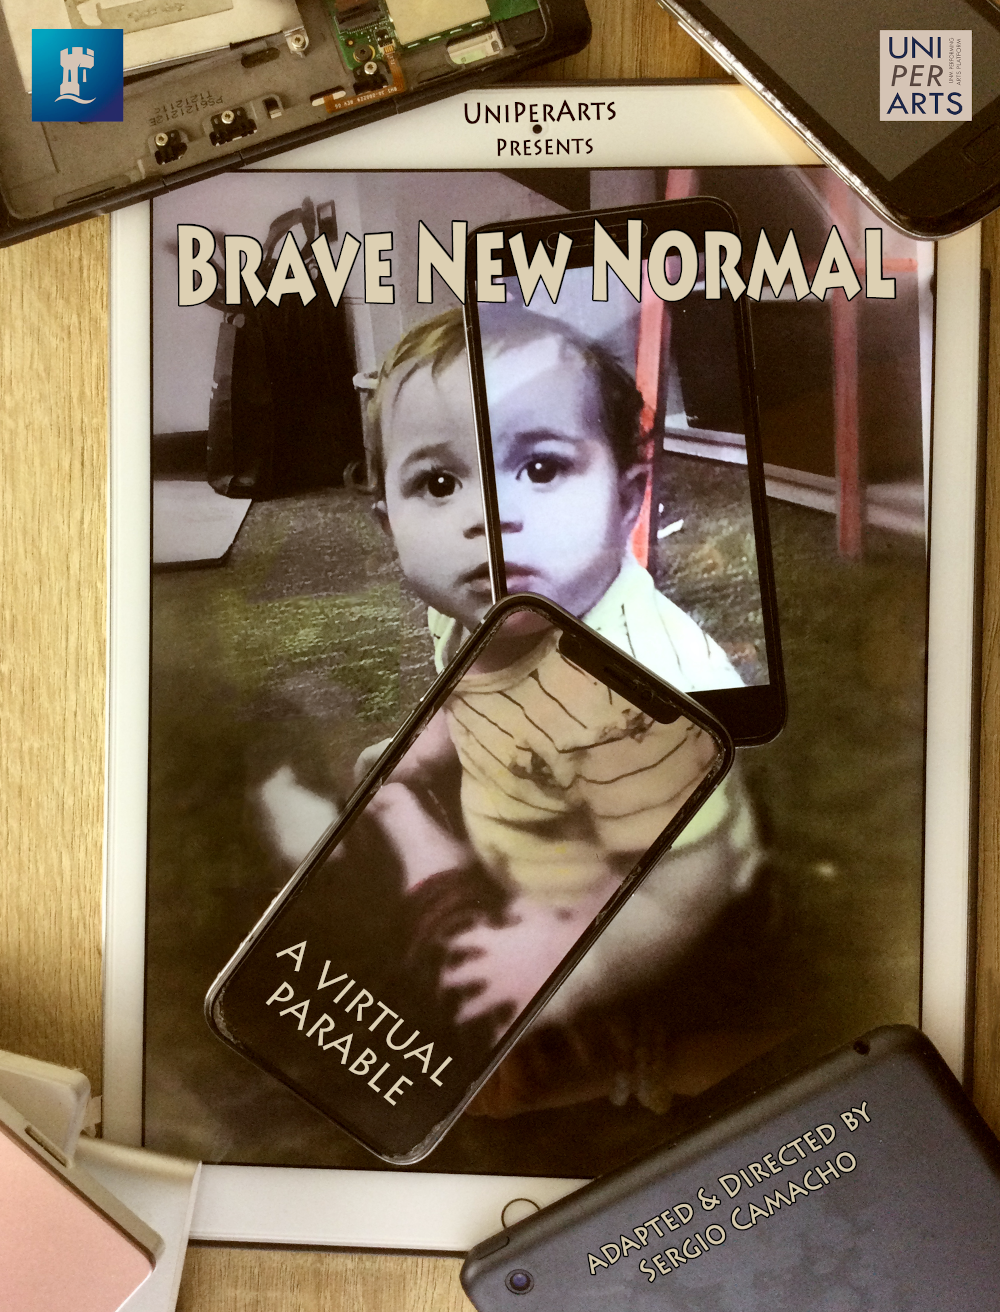 Poster promoting the play "Brave New Normal"